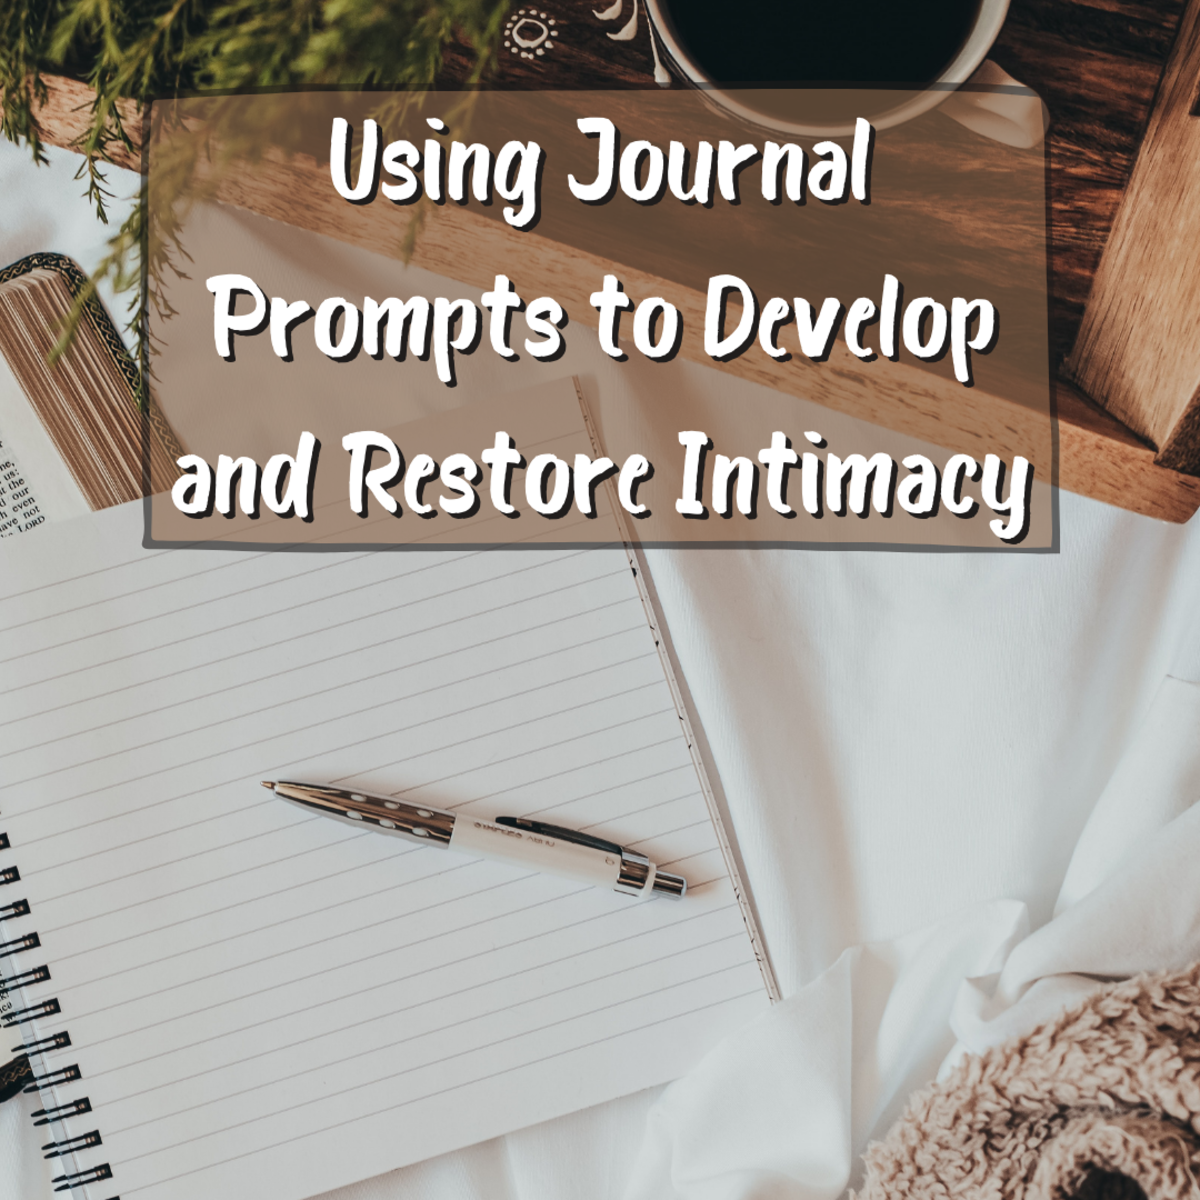 In this article you'll learn the importance of keeping a diary, why it might help you and your relationship, and also find a series of journal prompts that will grow your intimacy!